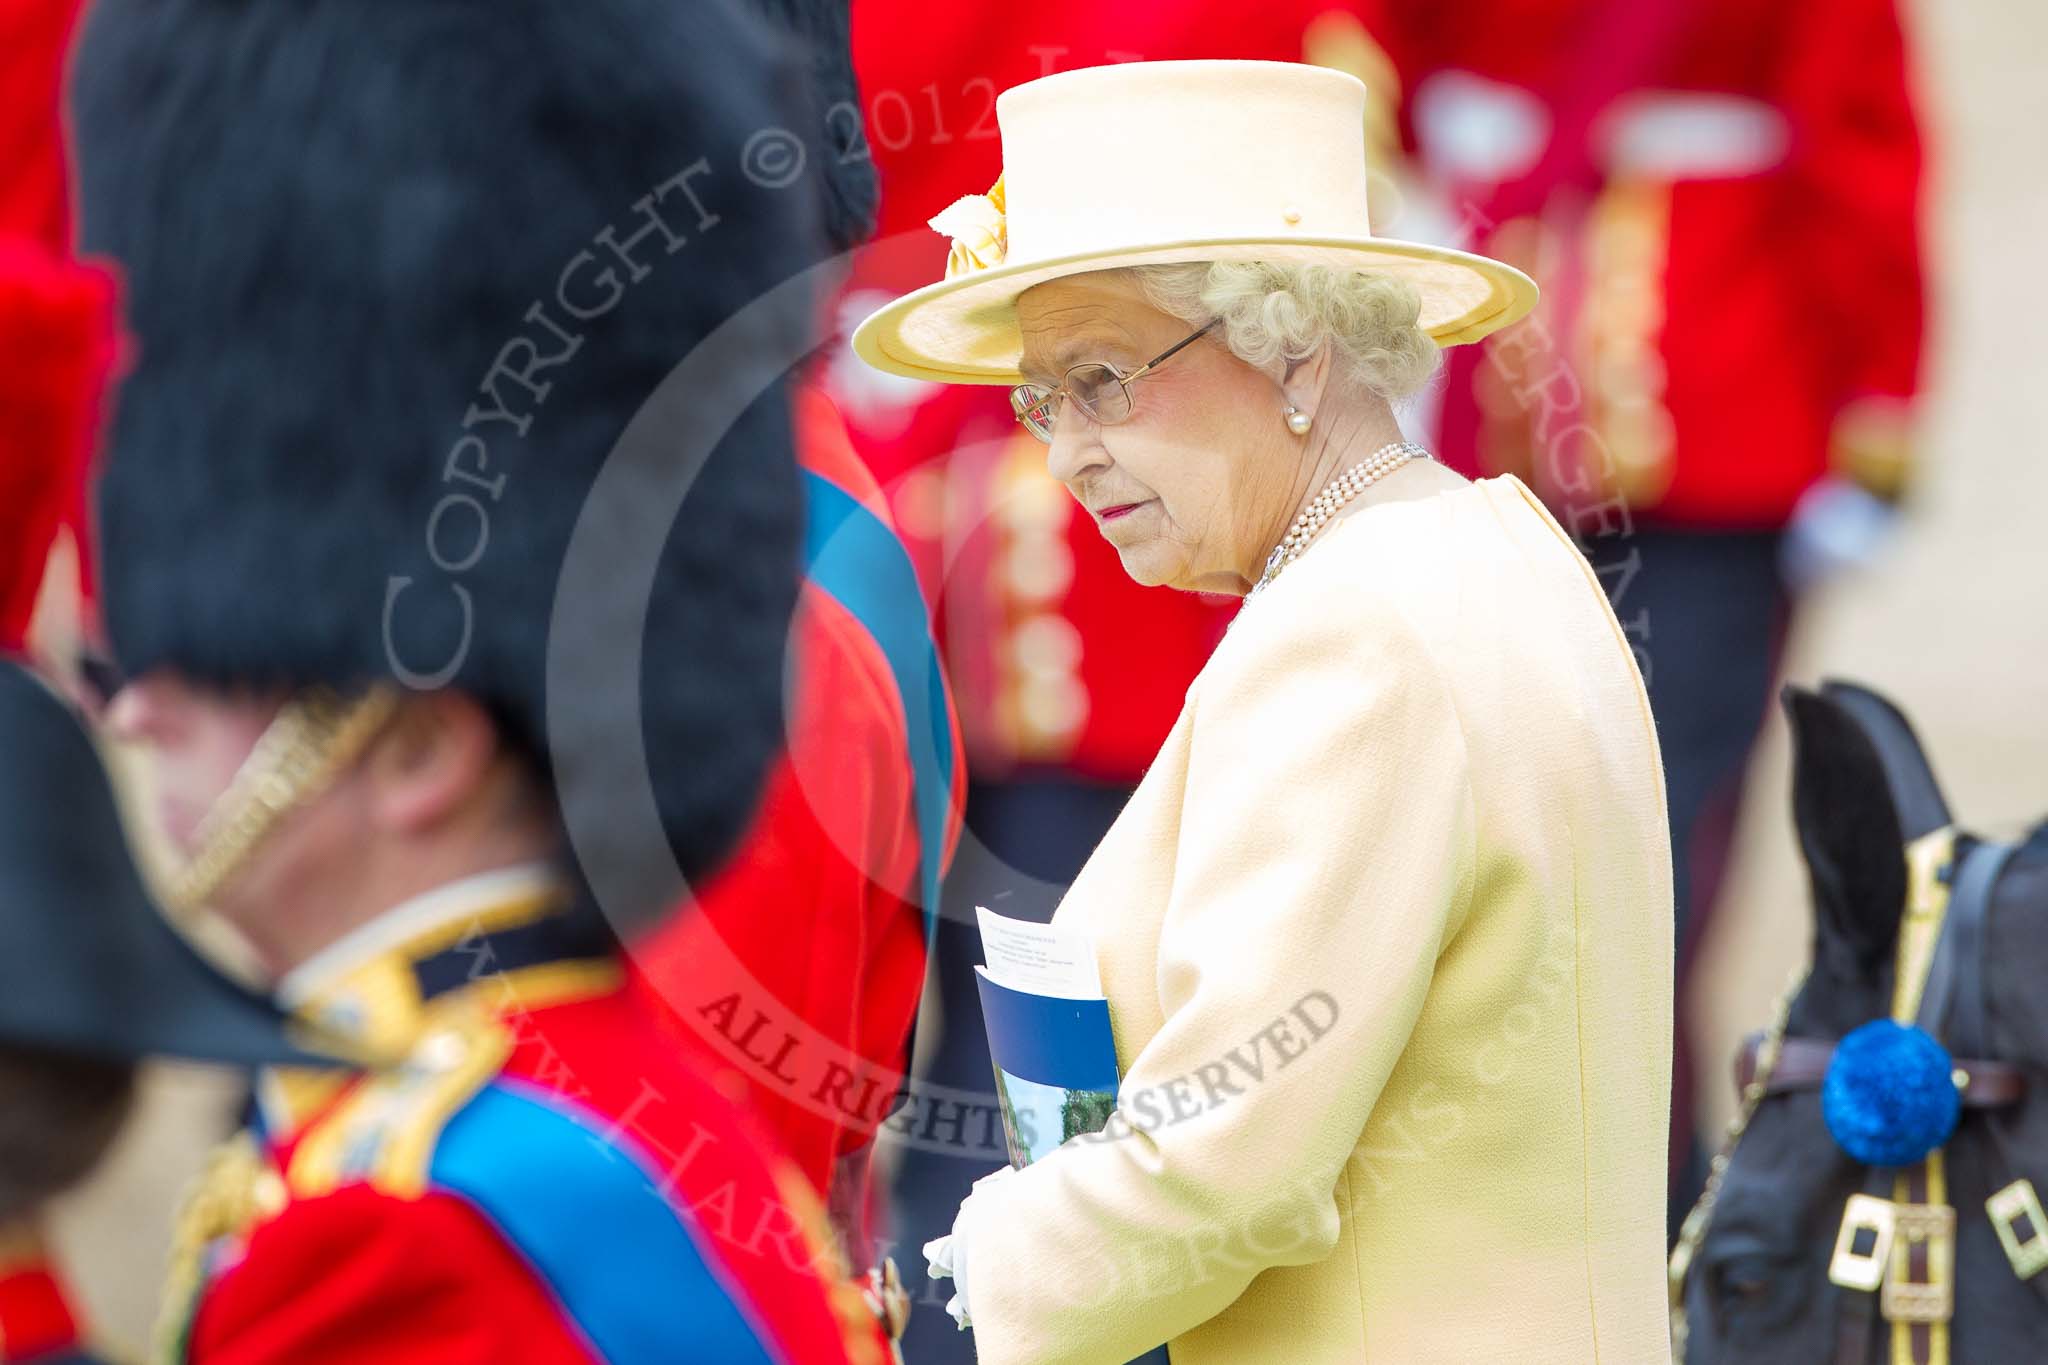 Trooping the Colour 2012: HM The Queen, HRH Prince Philip, and the Royal Colonels watching the March Past..
Horse Guards Parade, Westminster,
London SW1,

United Kingdom,
on 16 June 2012 at 11:38, image #436